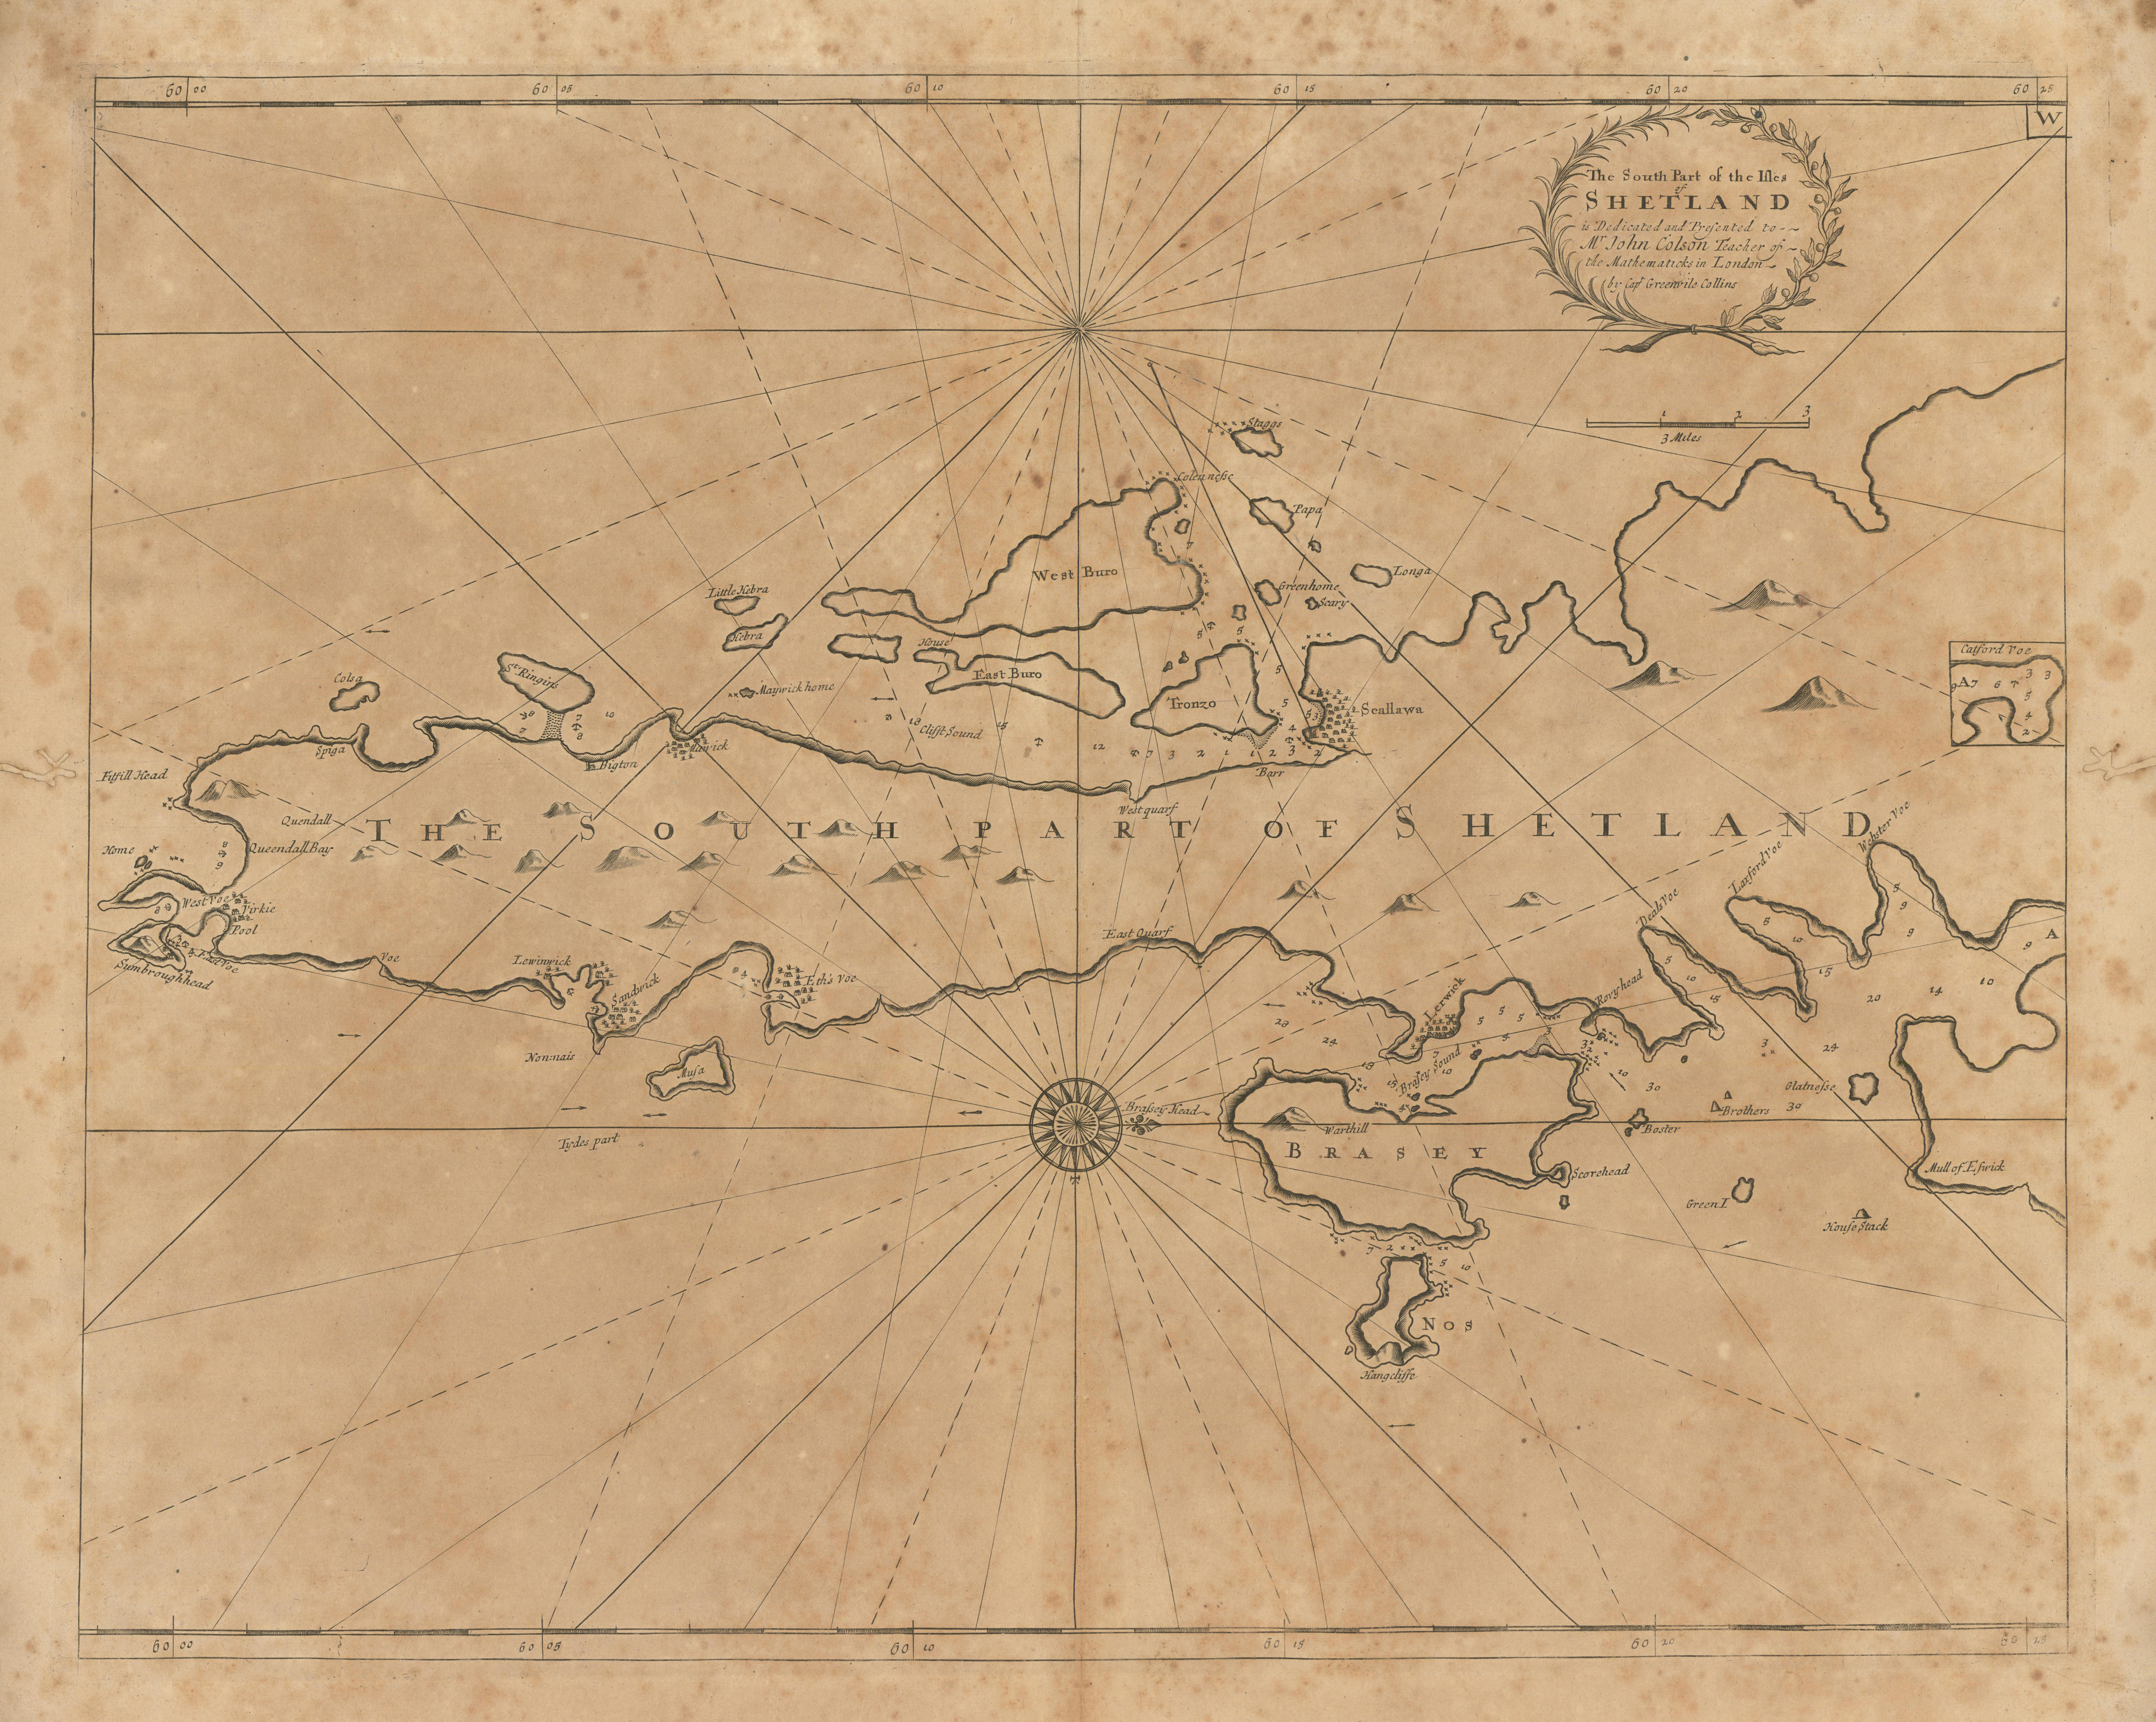 Associate Product The South Part of the isles of Shetland sea chart. Lerwick. COLLINS 1693 map